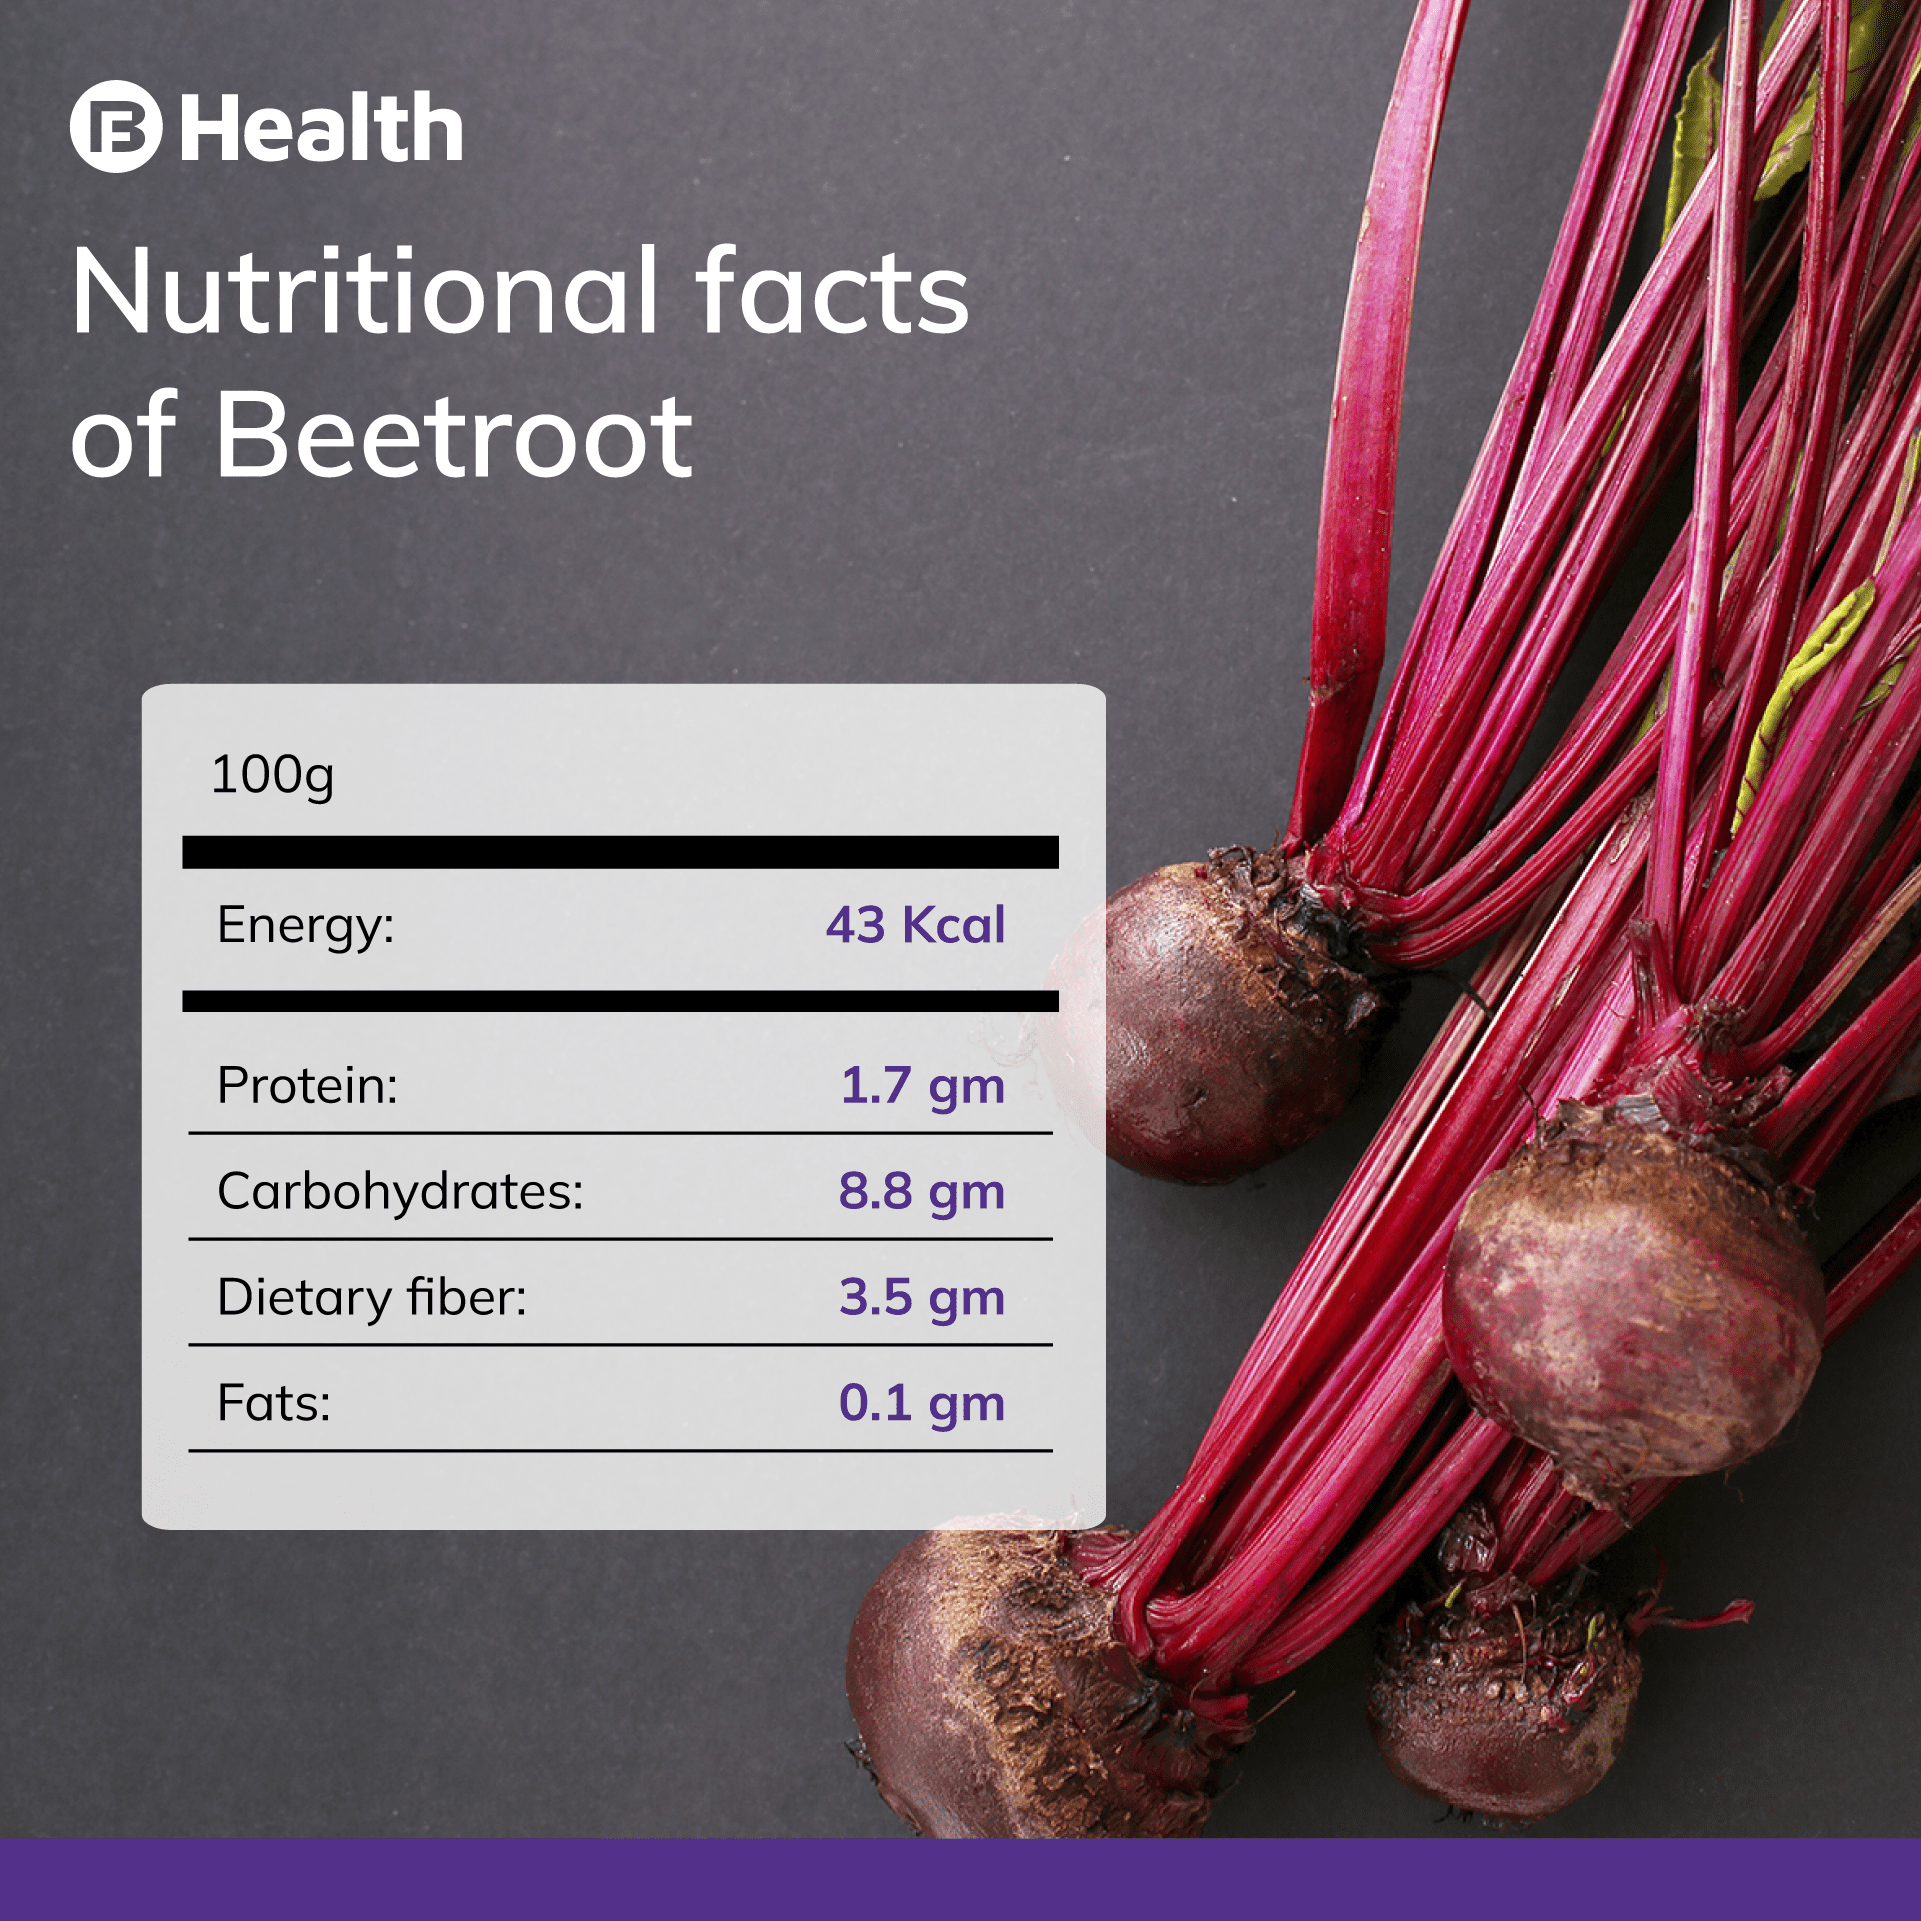 Nutritional facts of beetroot- infographic